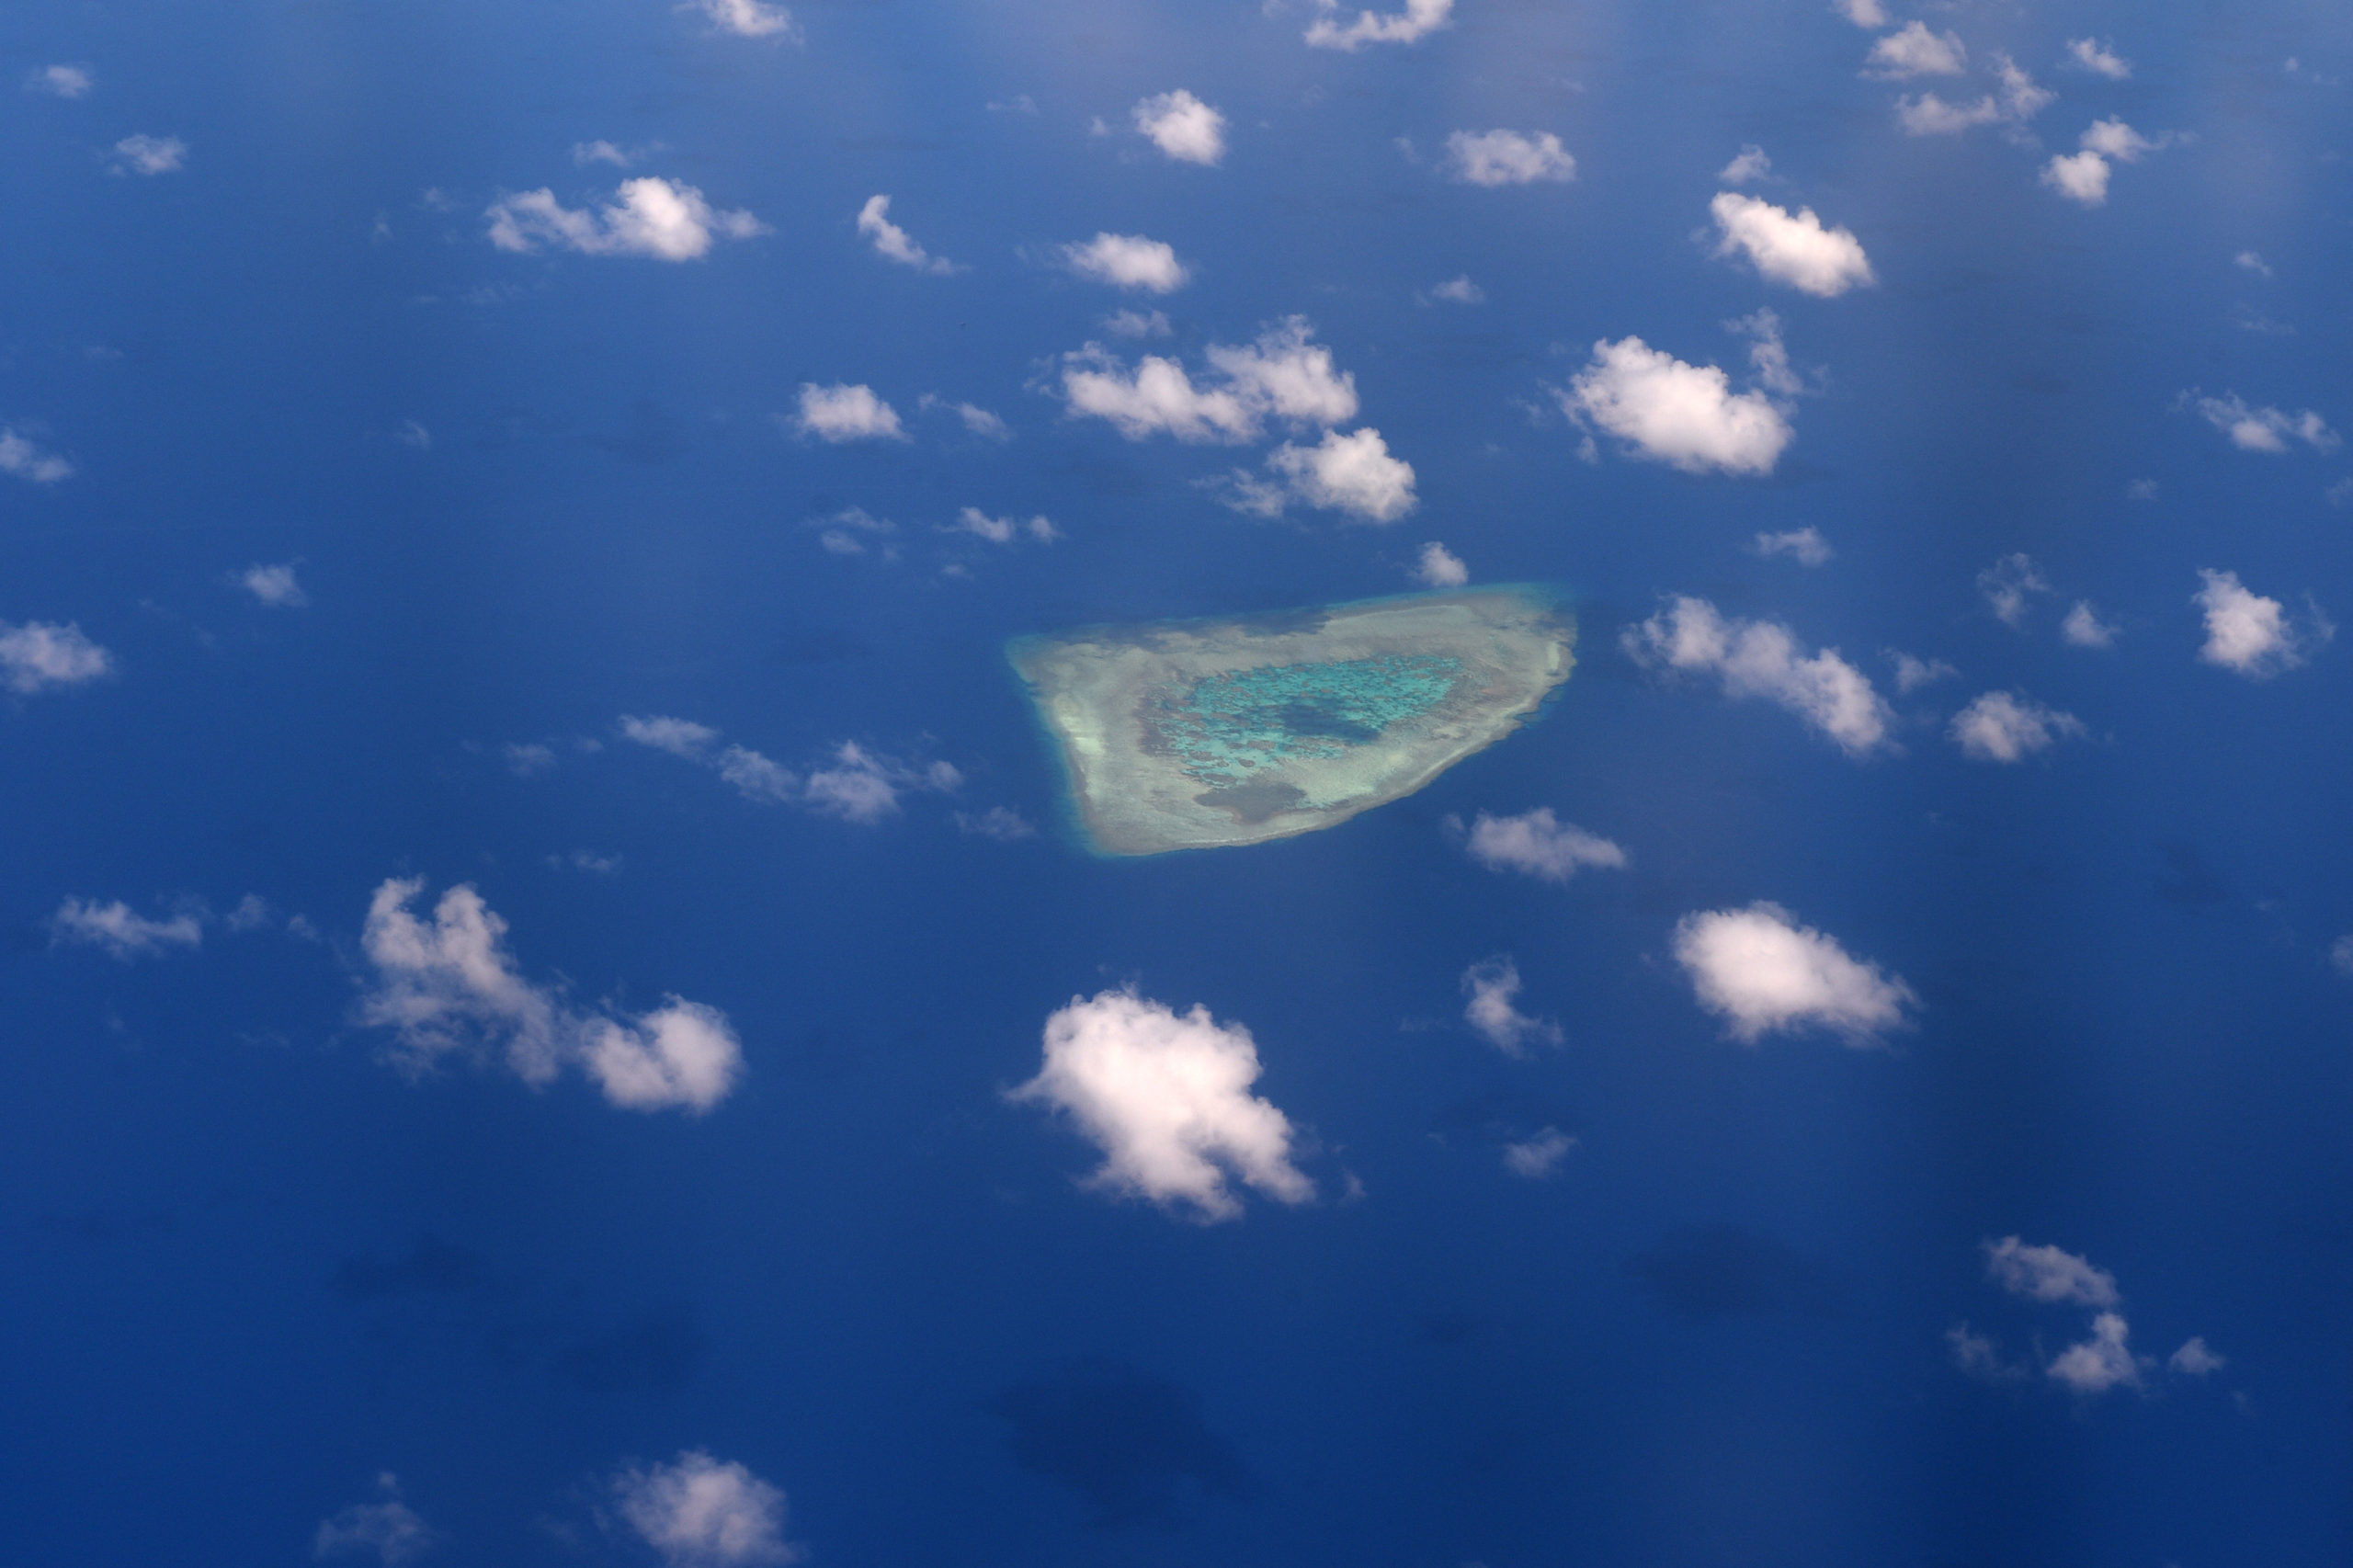 The DFA is “seriously concerned” about China's reported reclamation activities in Spratly Islands' unoccupied reefs in the South China Sea.